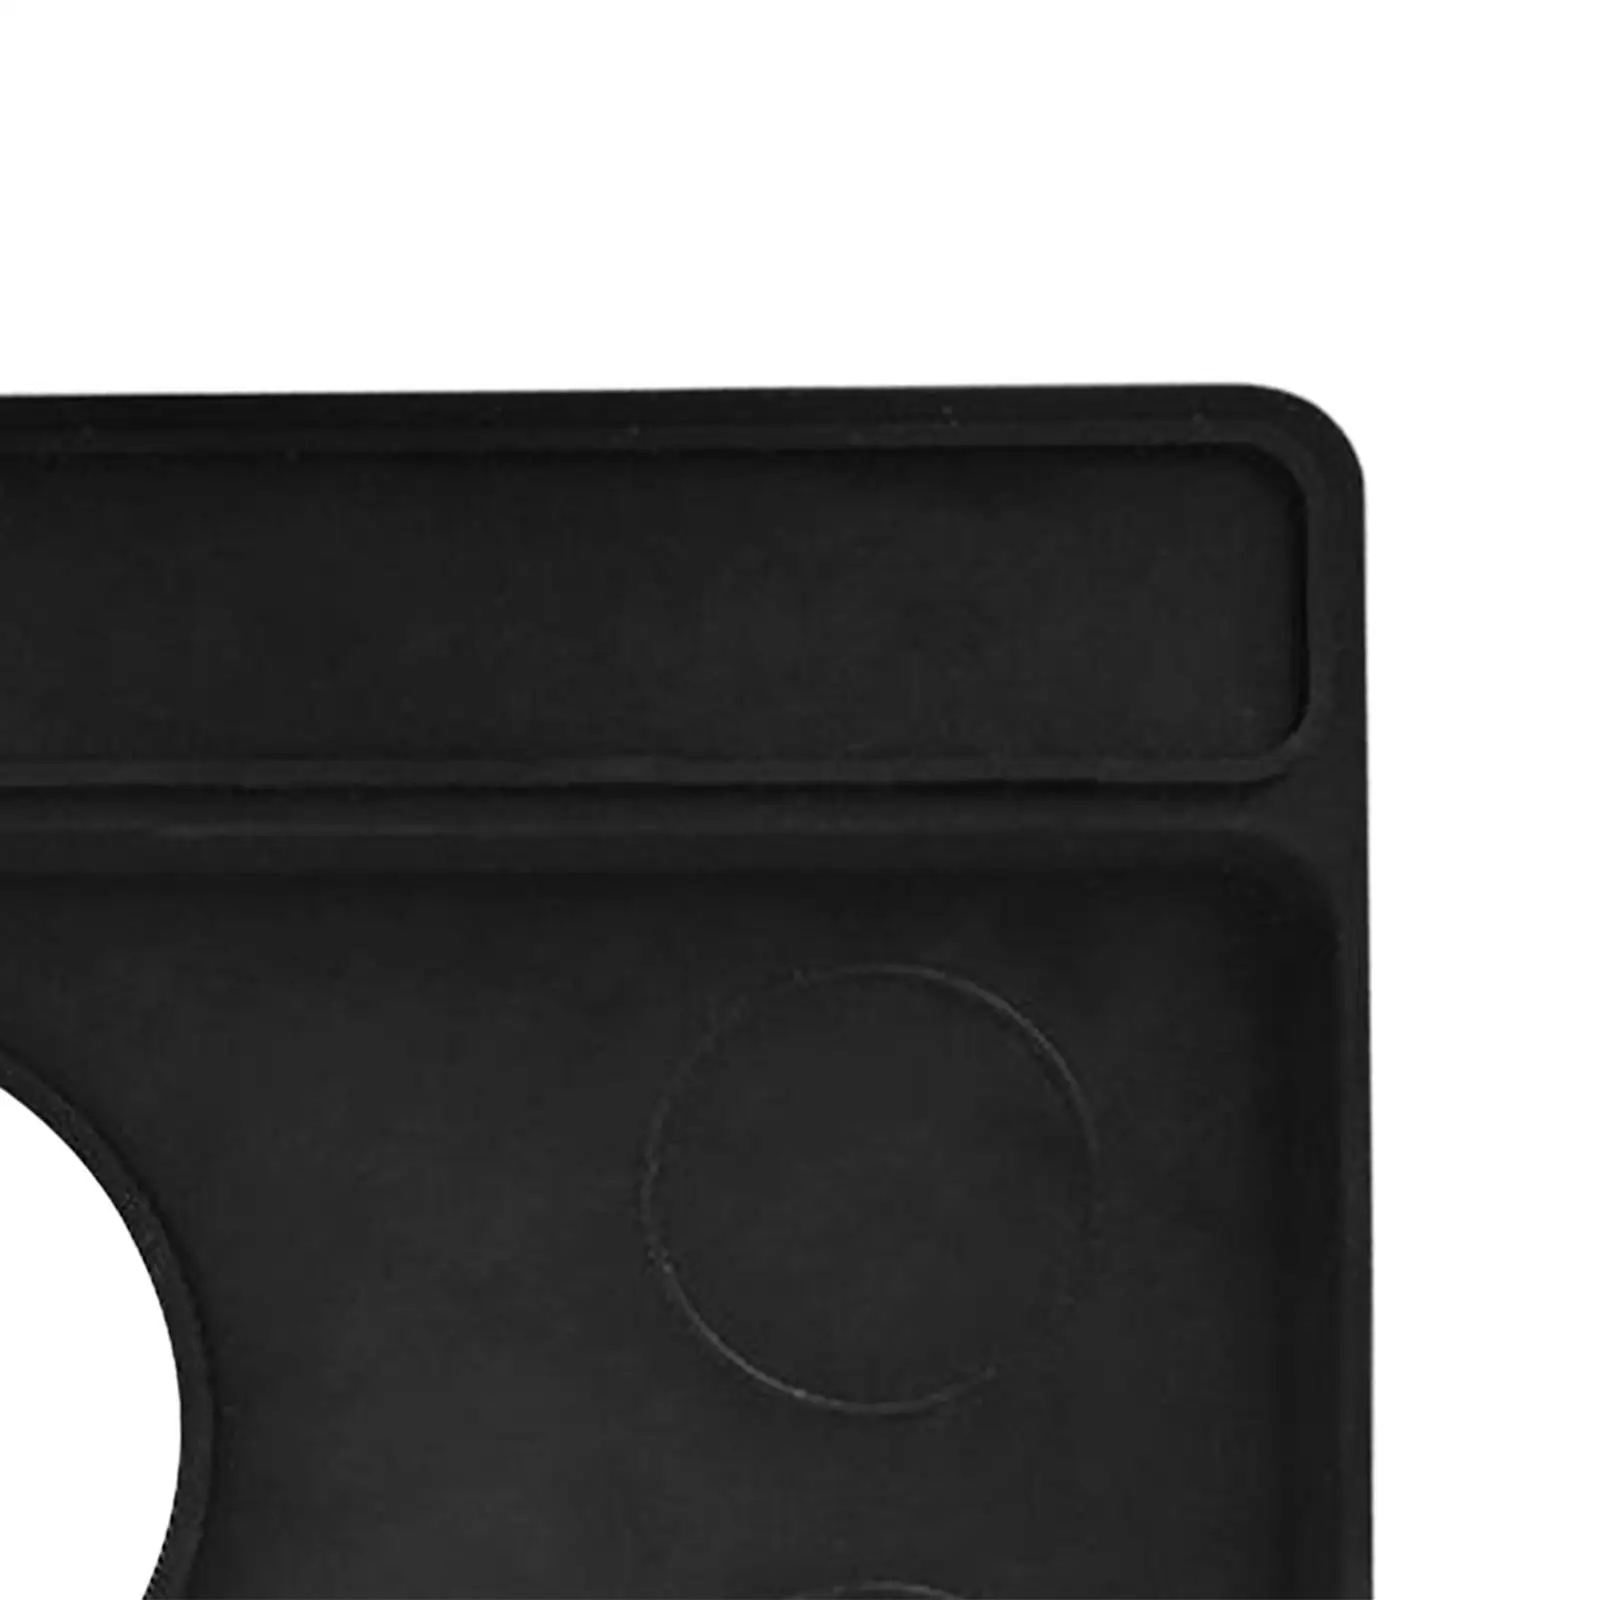 Coffee Maker Mat Silicone Cleaning Tool Coffee Grinder Mat for 870 880 878 Coffee Machine Countertop Dish Washing Racks Kitchen